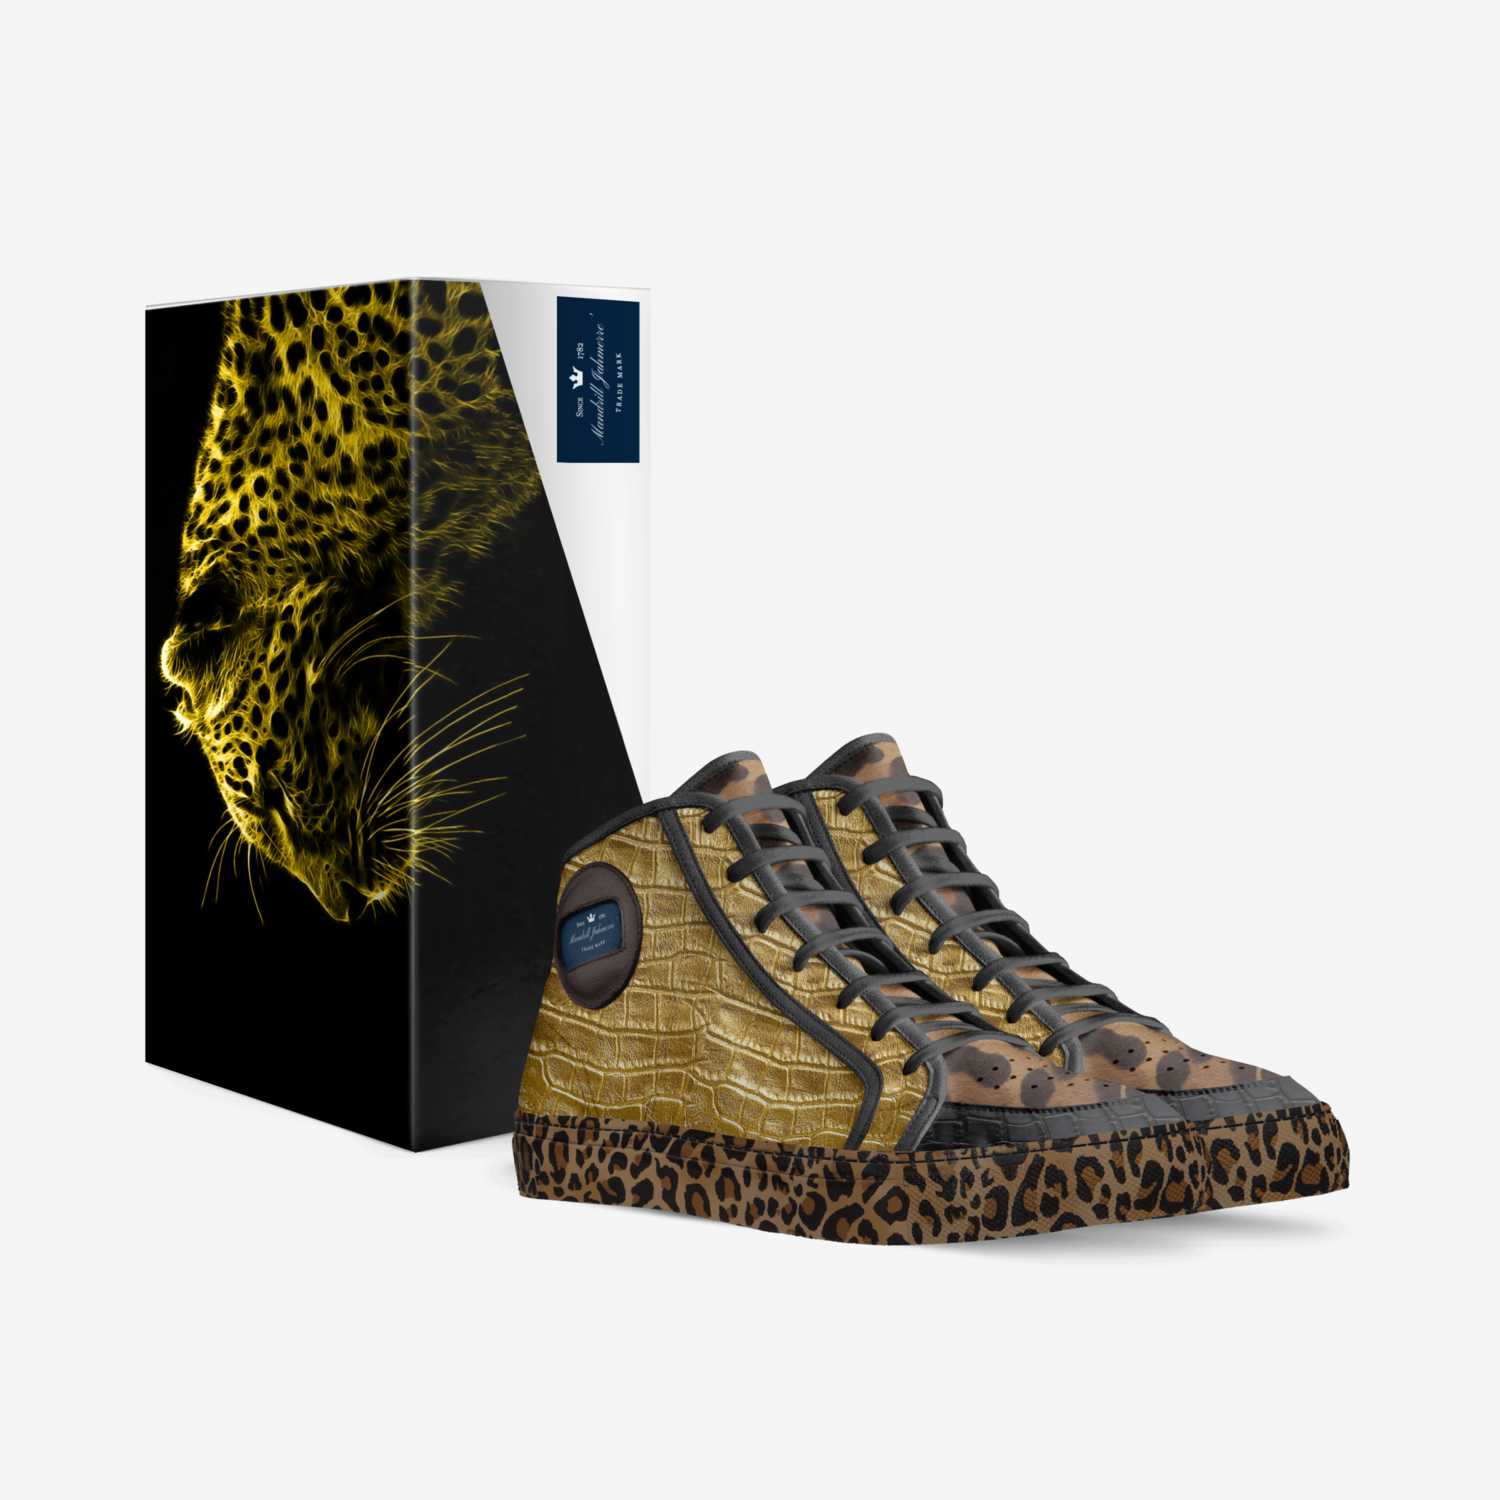 Mandrill Jahmerre' custom made in Italy shoes by Chico Jenkins | Box view